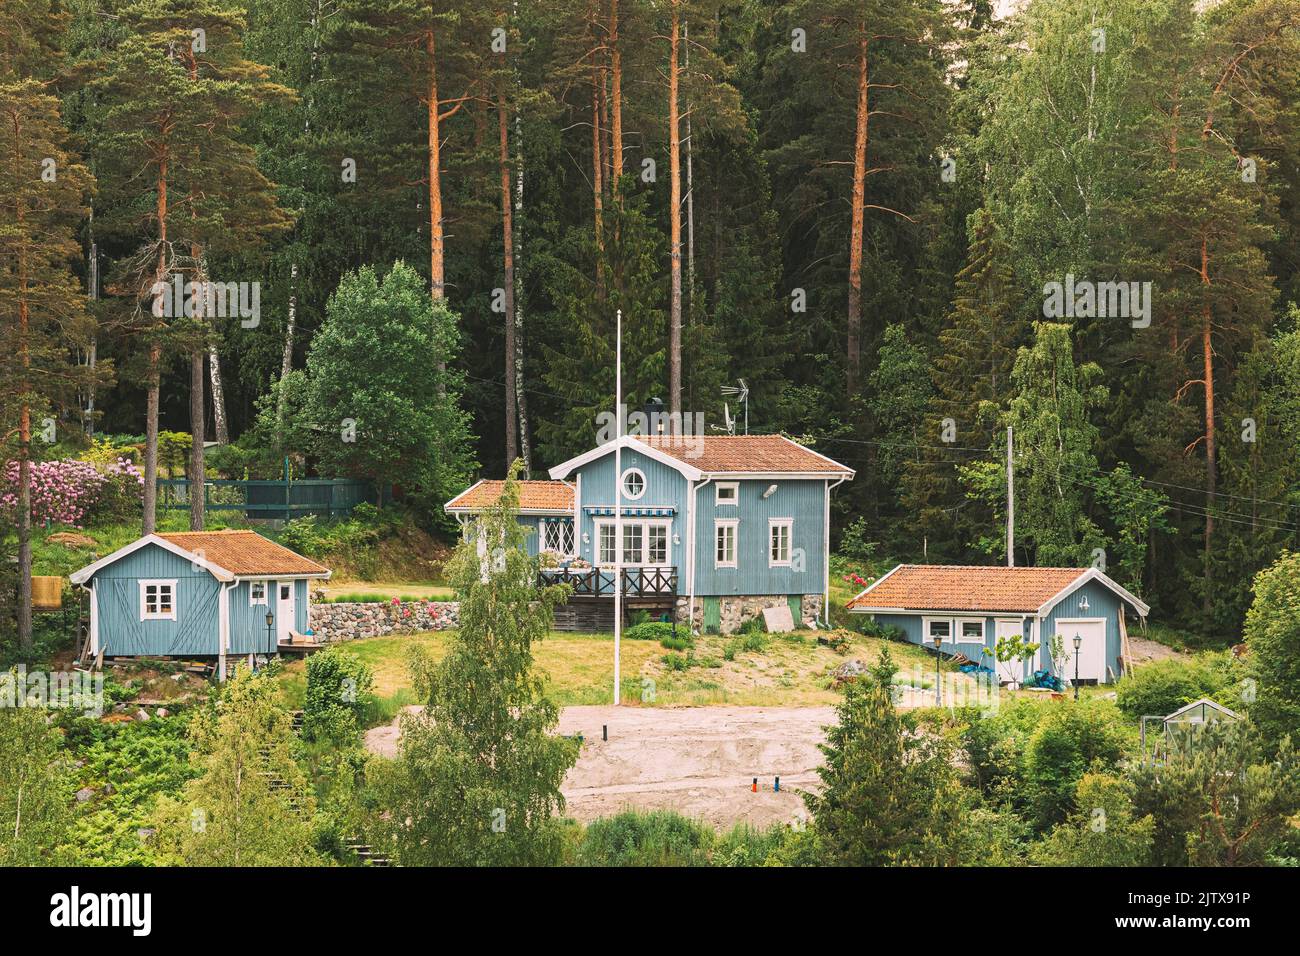 Sweden. Beautiful Swedish Wooden Log Cabins Houses In Forest In Summer Day. Stock Photo